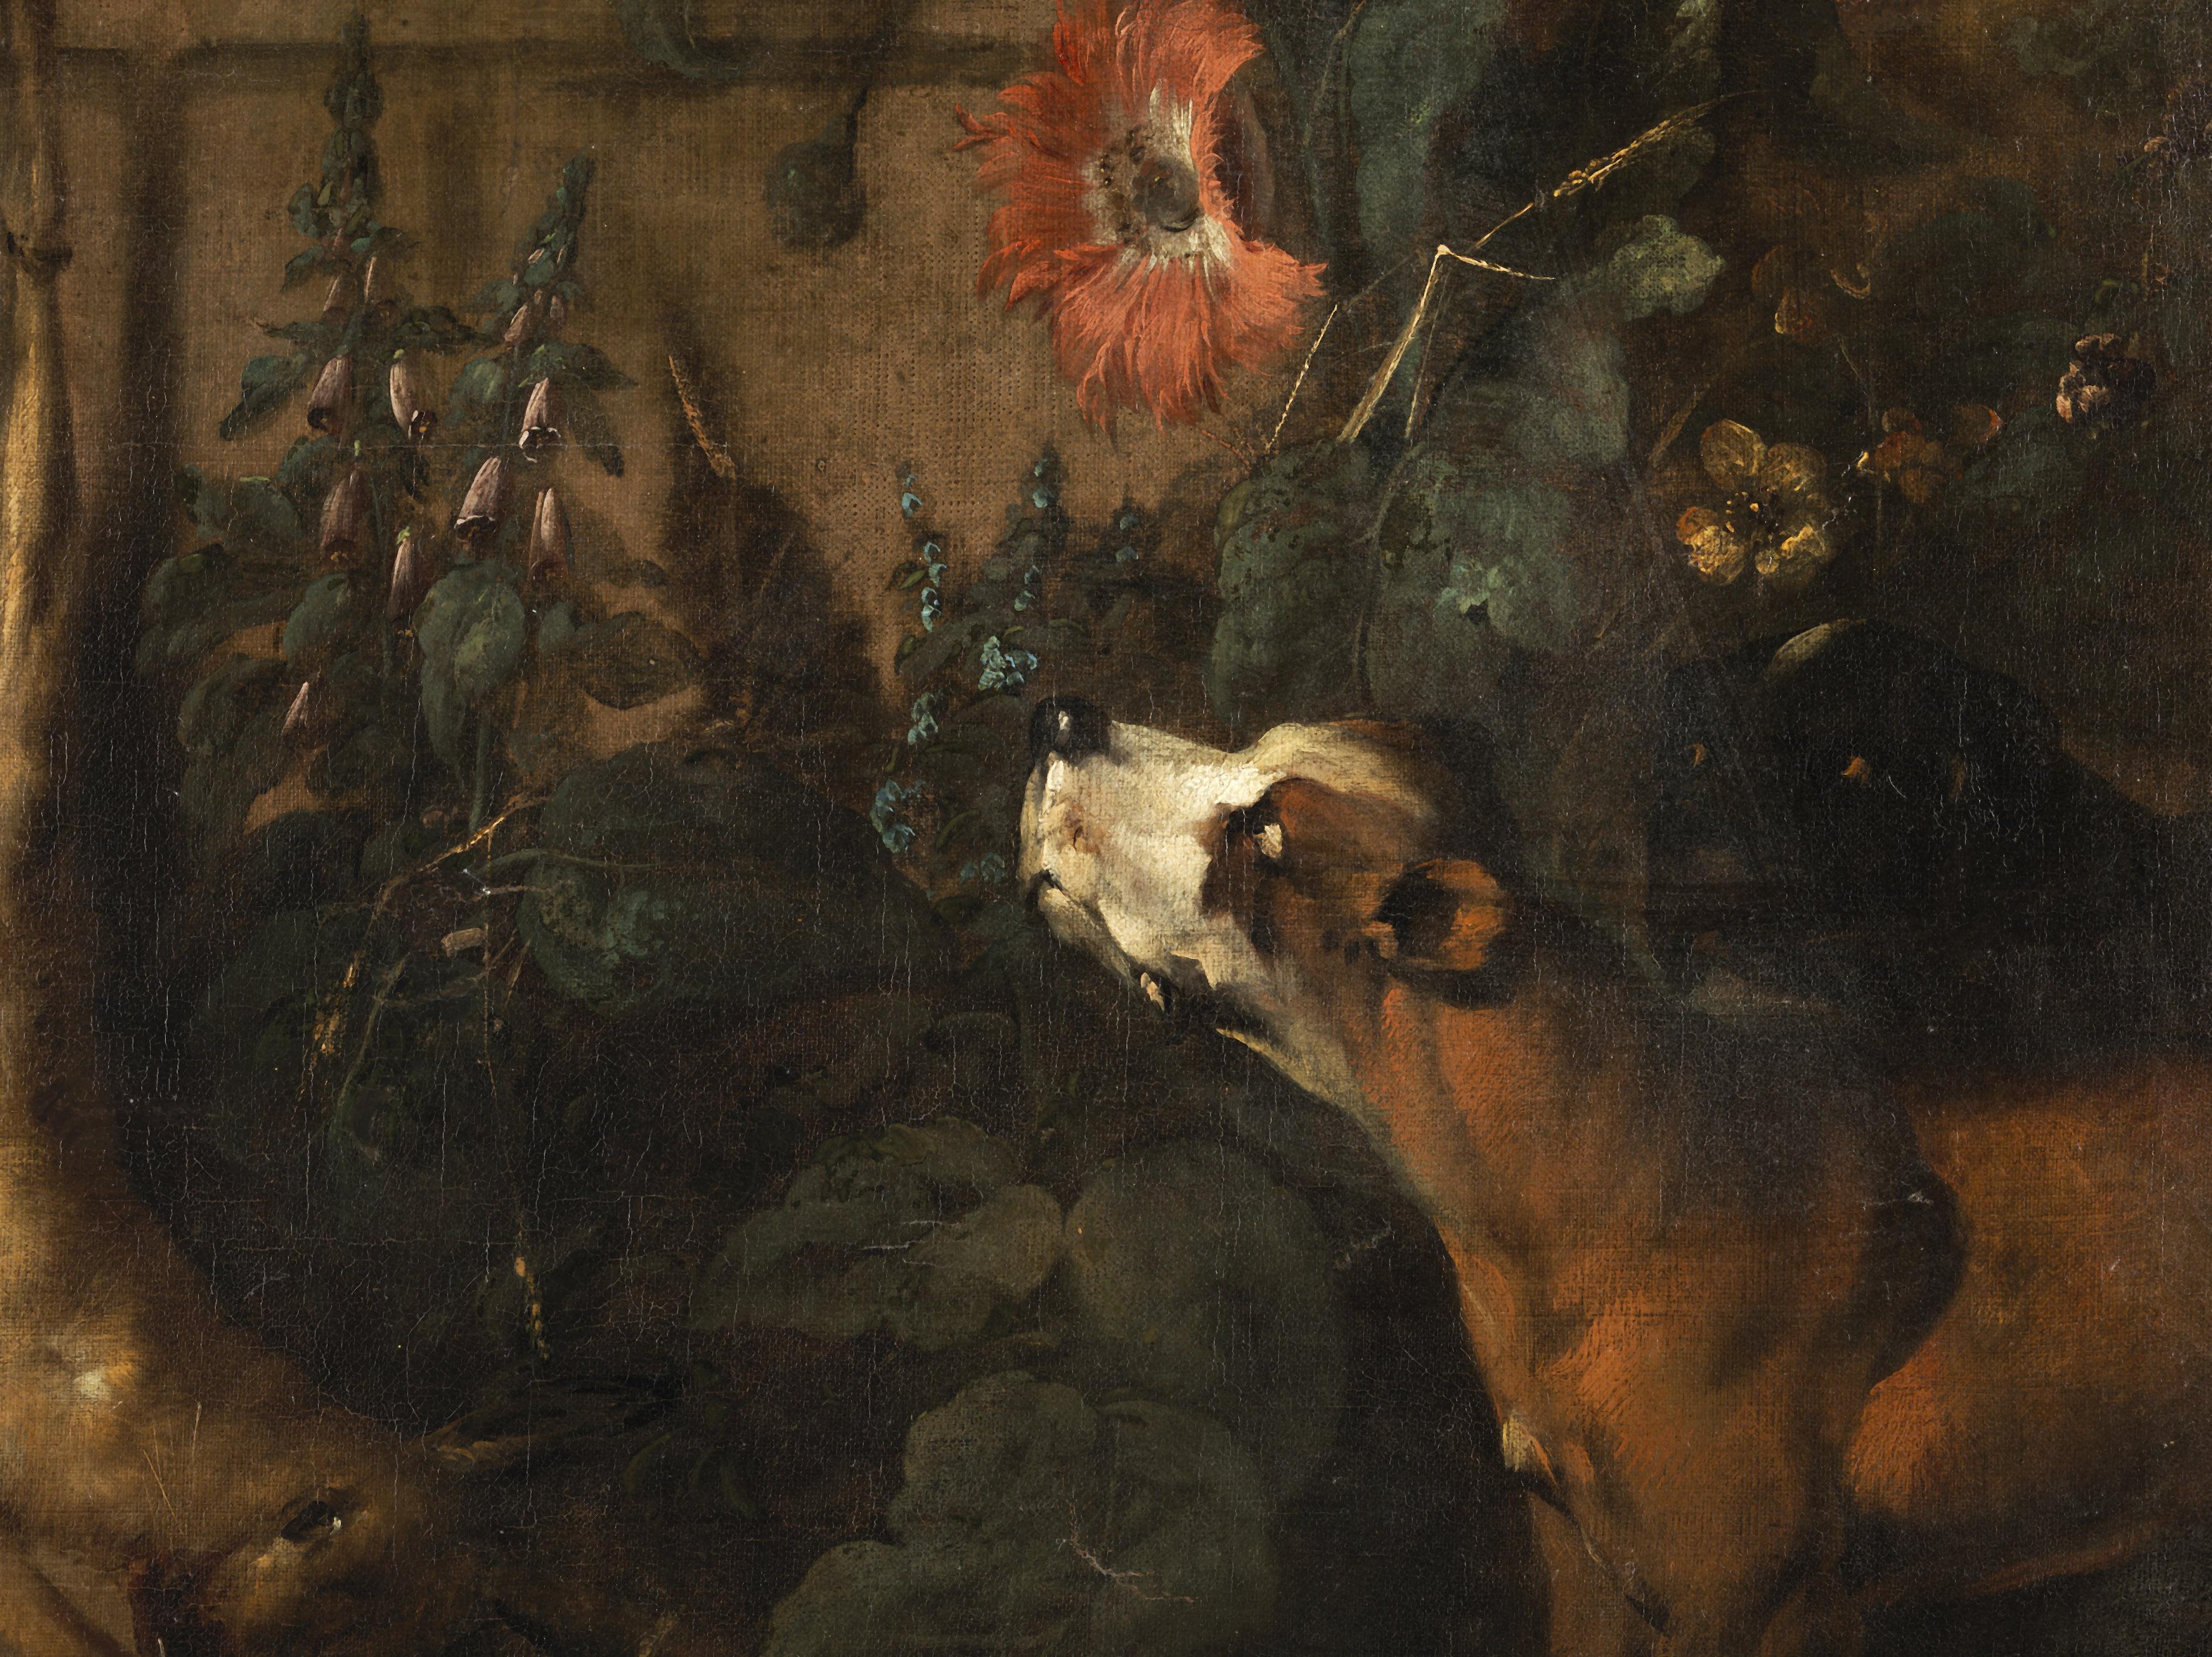 Jan Weenix (Attr.)
1640/41 - 1719

Still life with dog
Oil on canvas, cm. 103 × 99

The scene takes place in a courtyard surrounded by a wall. A brown hound seems to be checking the result of the recently concluded hunt, carefully observing